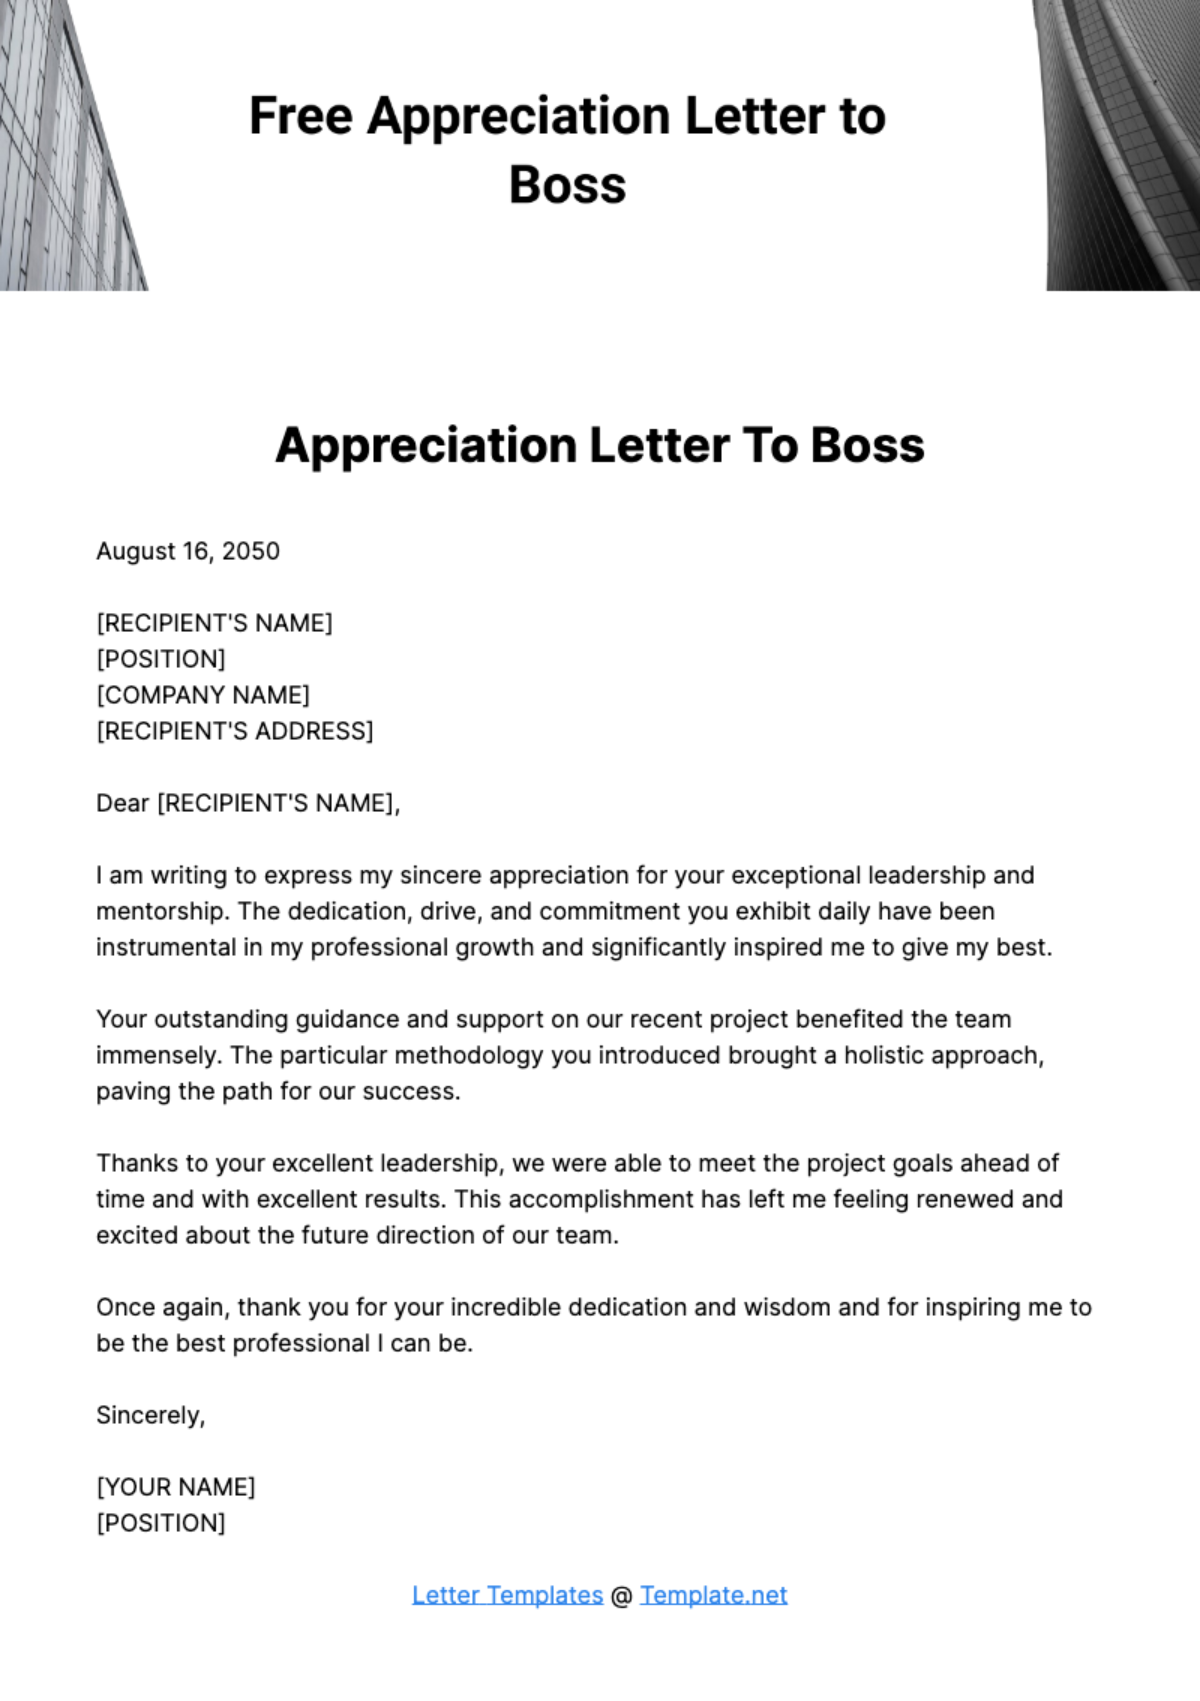 Free Appreciation Letter to Boss Template